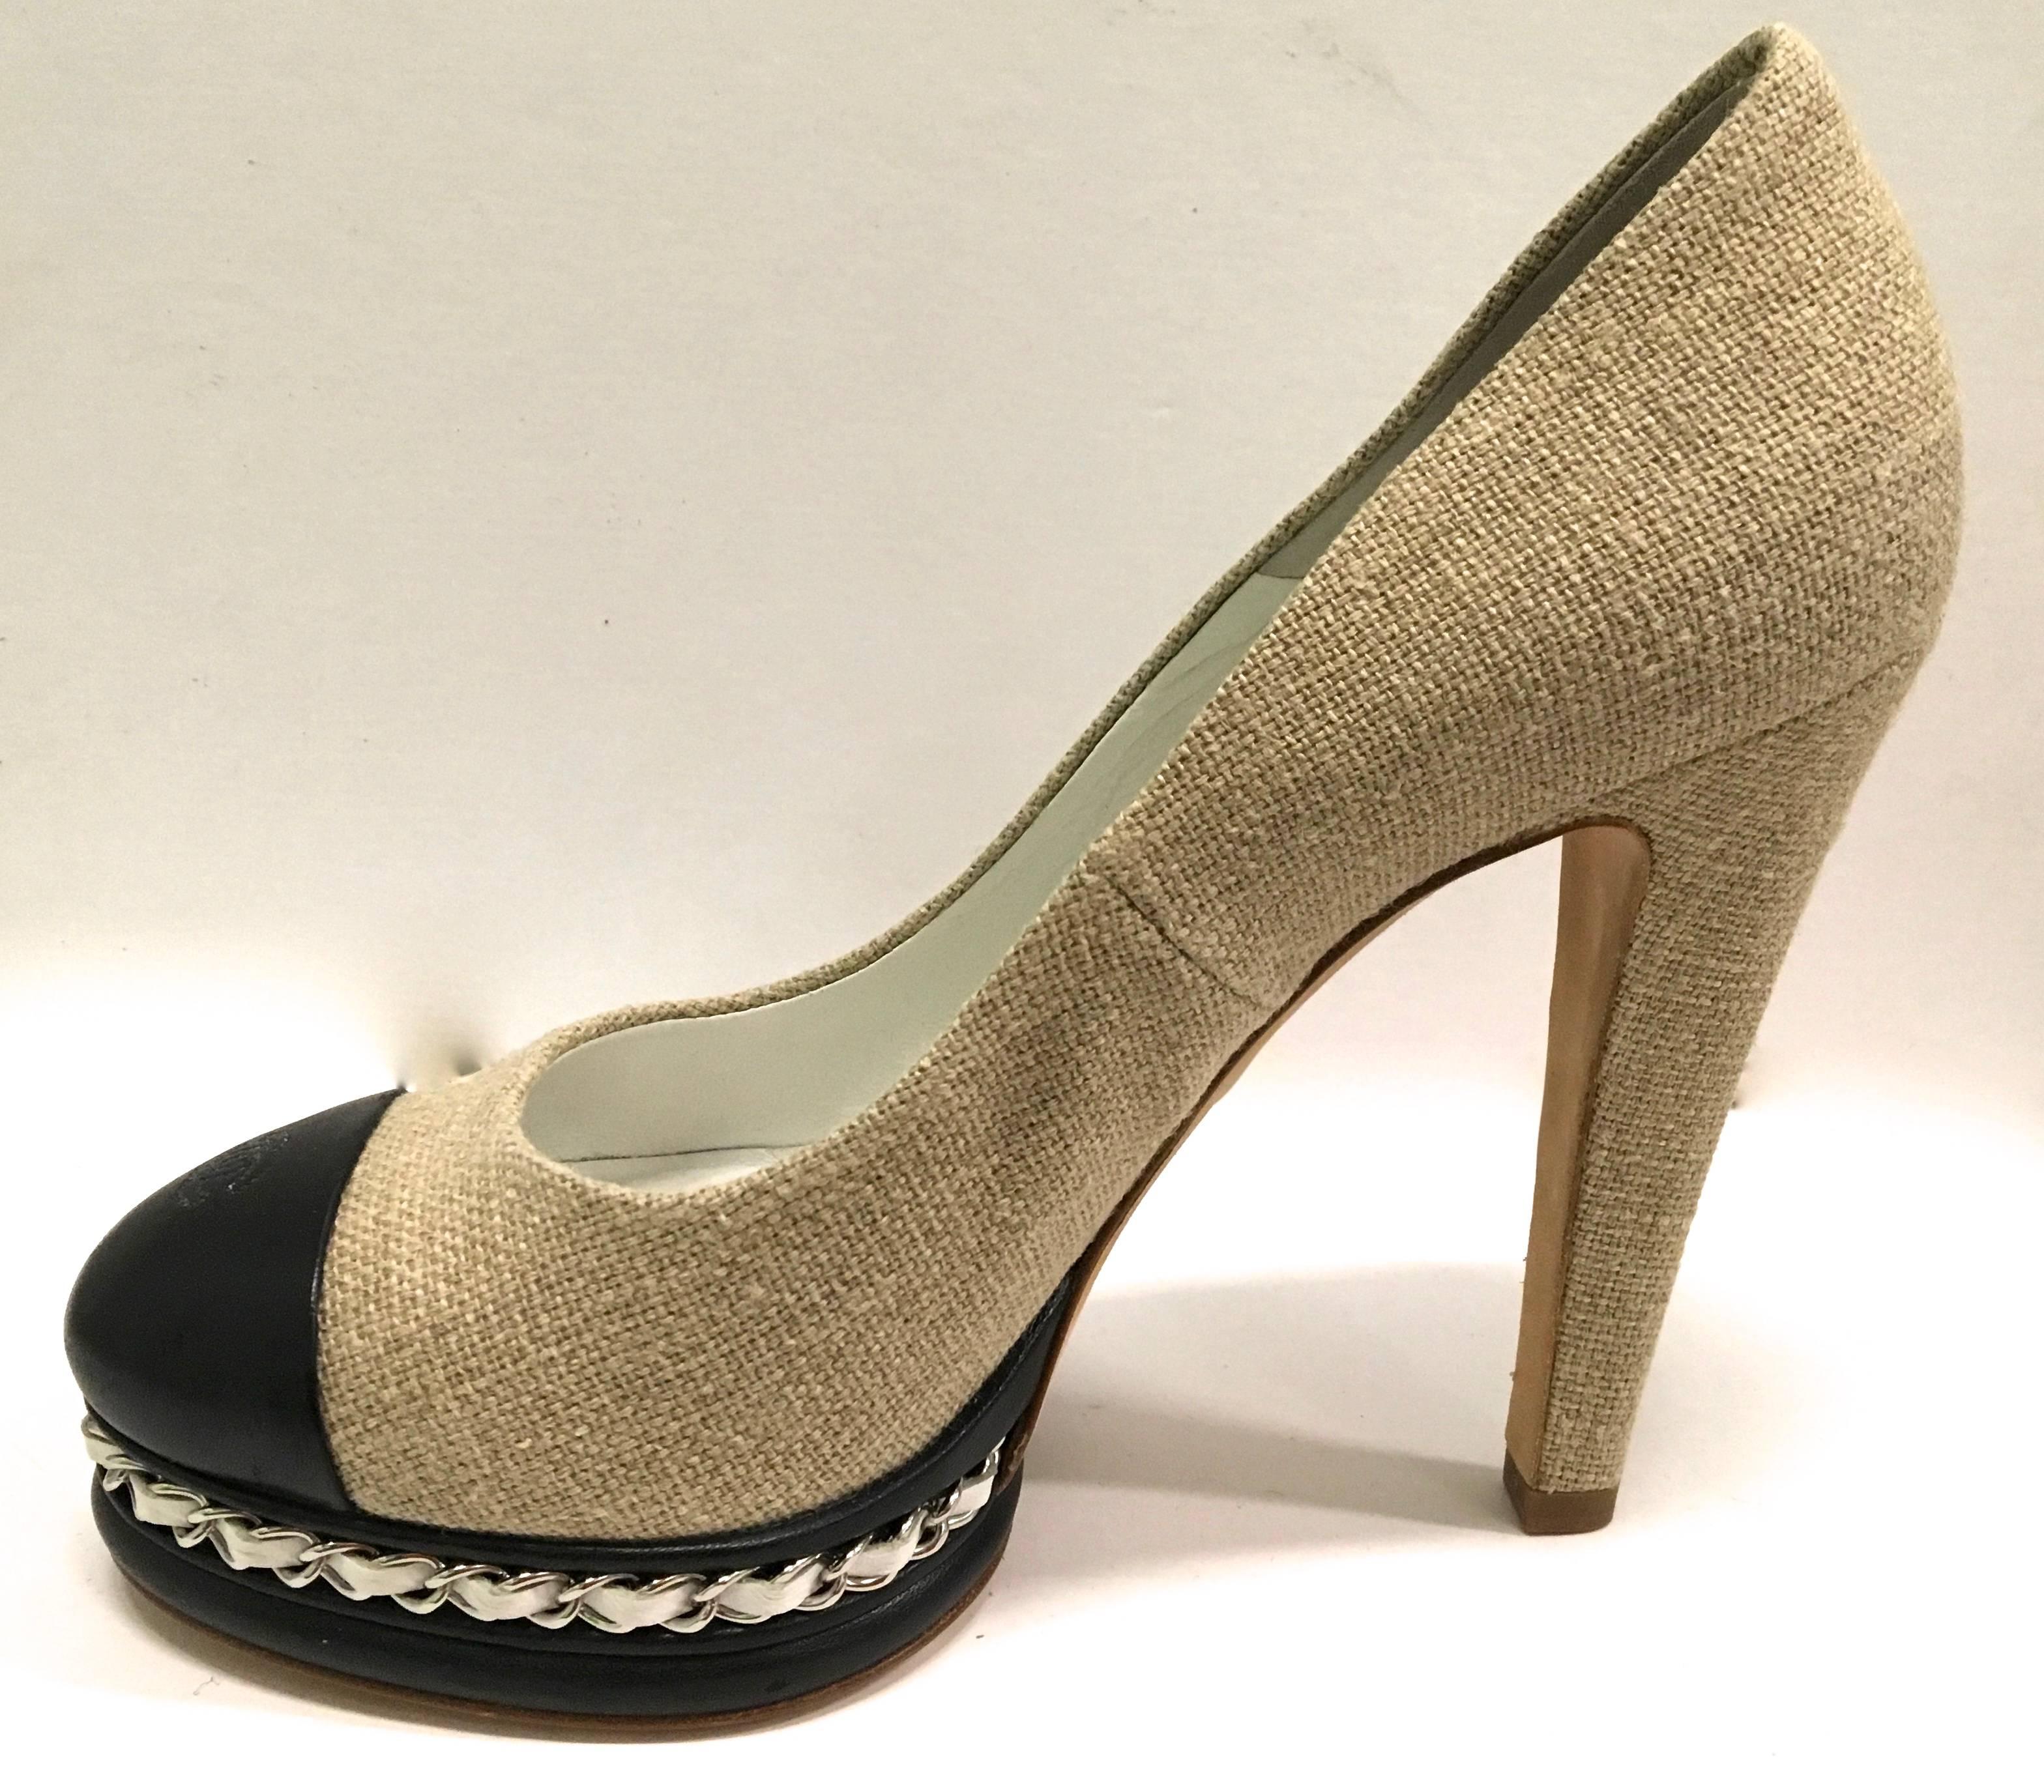 Beige New Chanel Shoes - 8.5 - Platform Heels - Pump w/ Iconic Chain For Sale